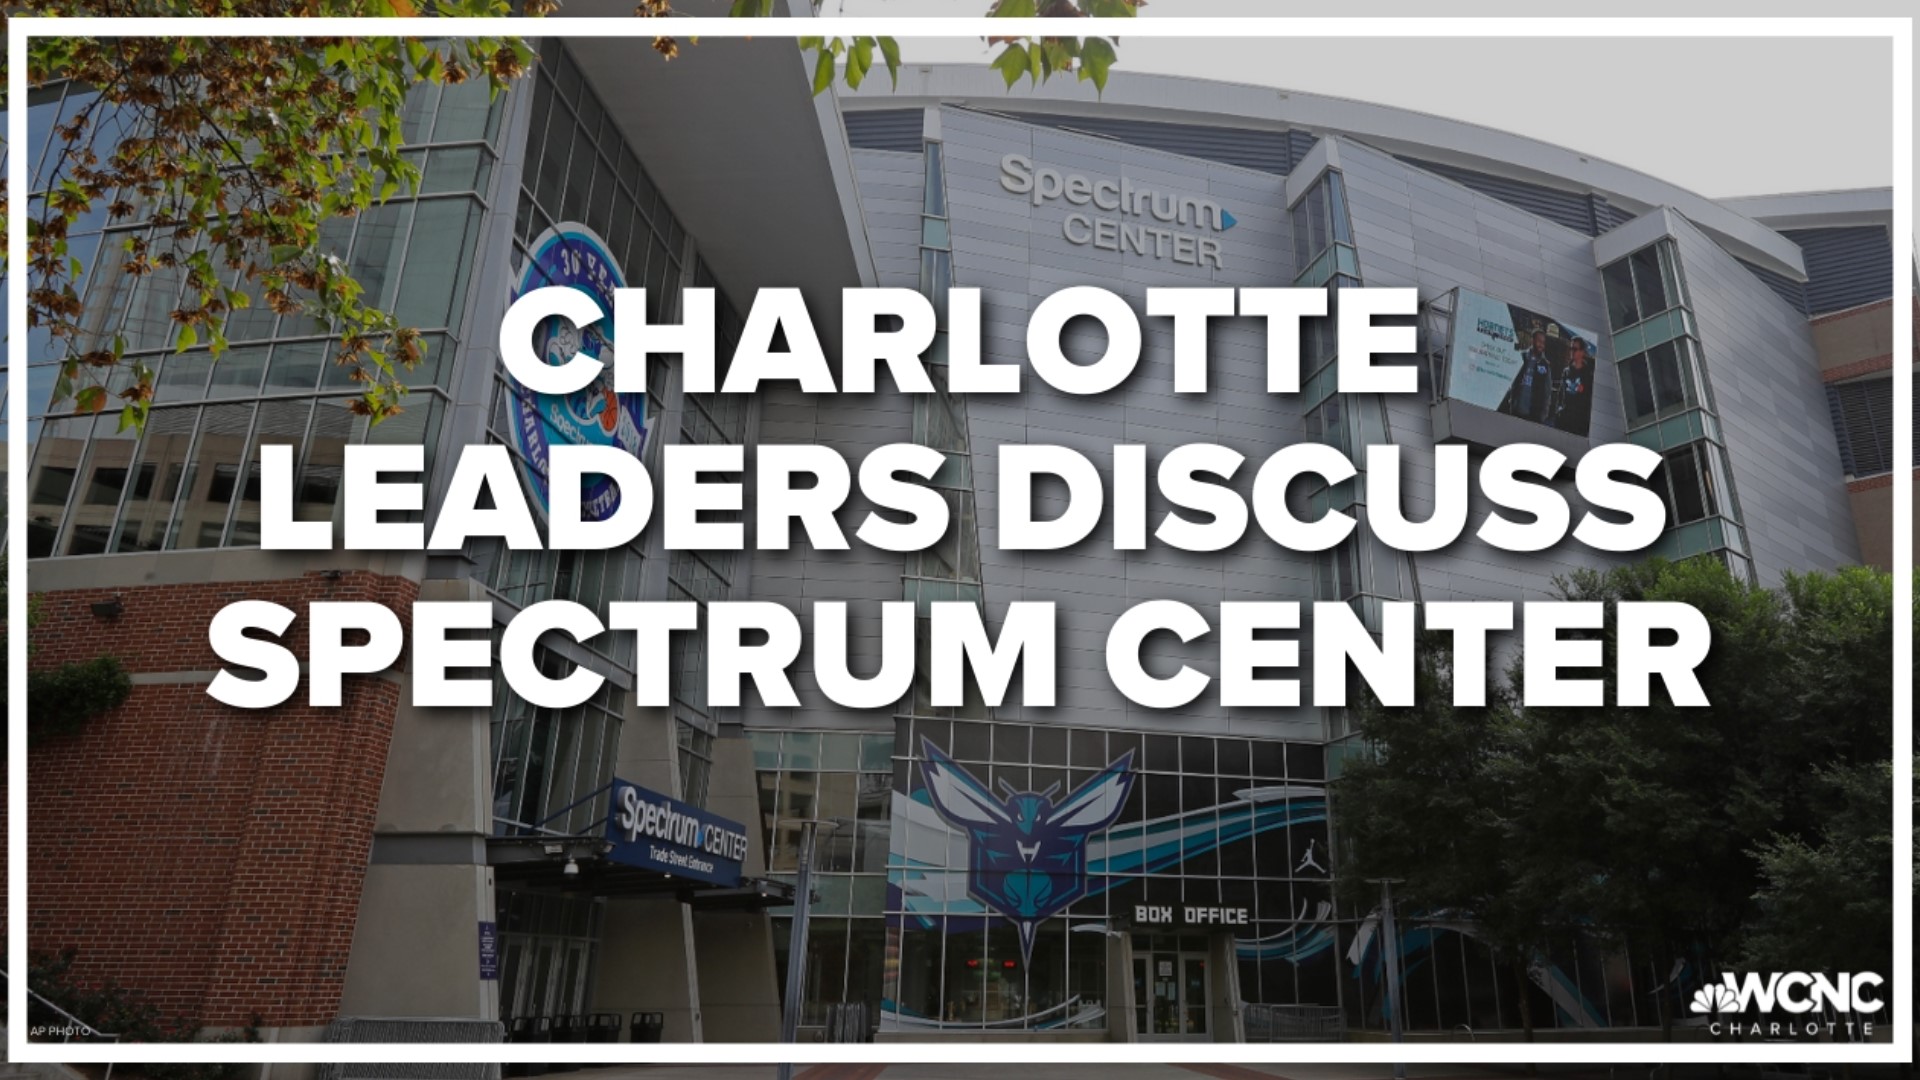 Charlotte City leaders met Mon. June 6 and provided feedback on the proposed Spectrum Center renovations and the addition of a "Performance Center."